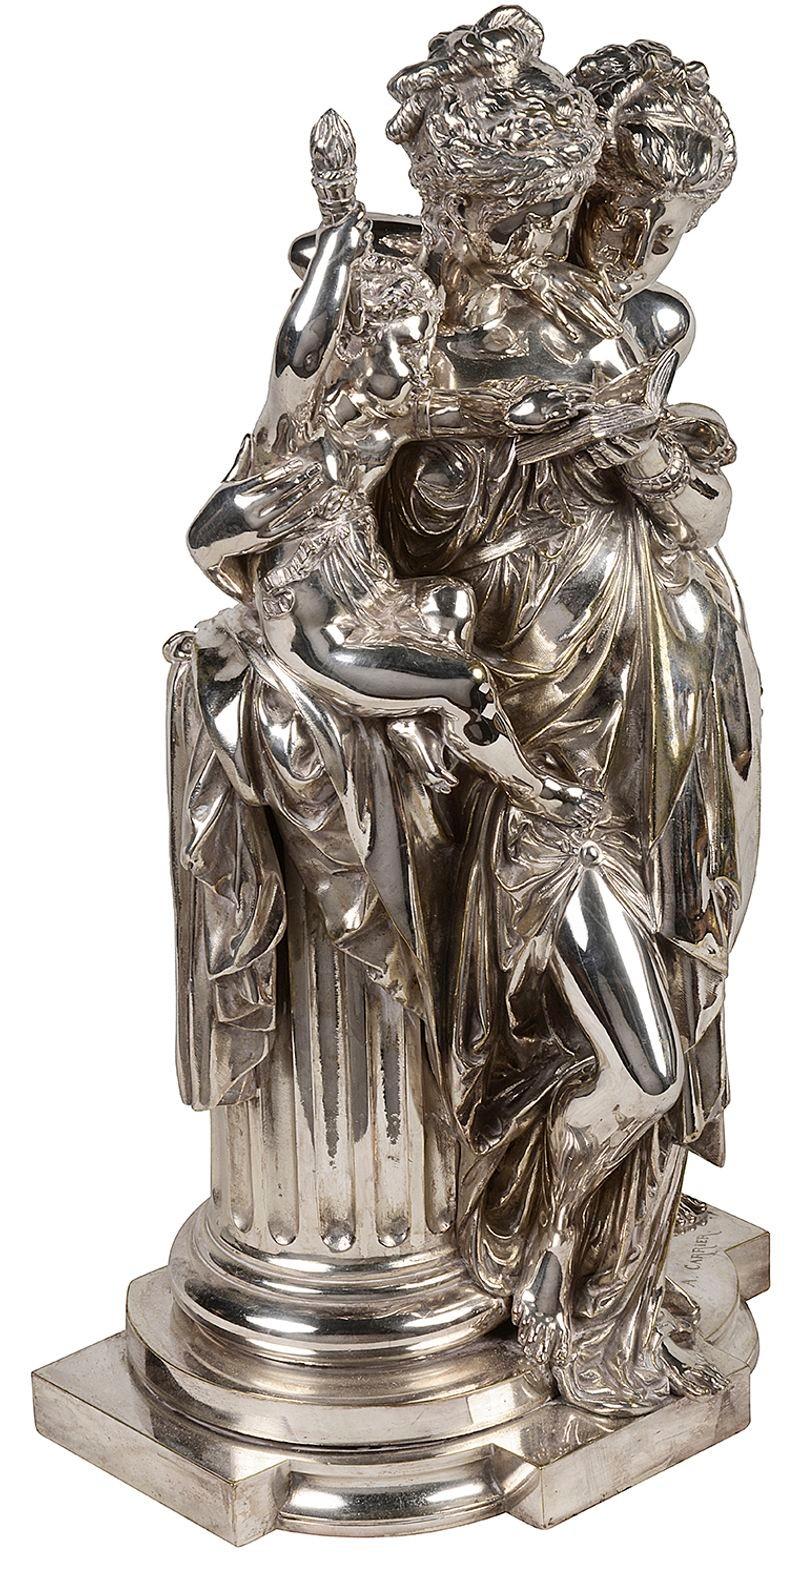 A silvered-bronze classical figural group of two maidens and a putto entitled 'The Reading' after Albert-Ernest Carrier-Belleuse, 19th century.
Carrier-Belleuse was born on 12 June 1824 at Anizy-le-Château, Aisne, France. He began his training as a